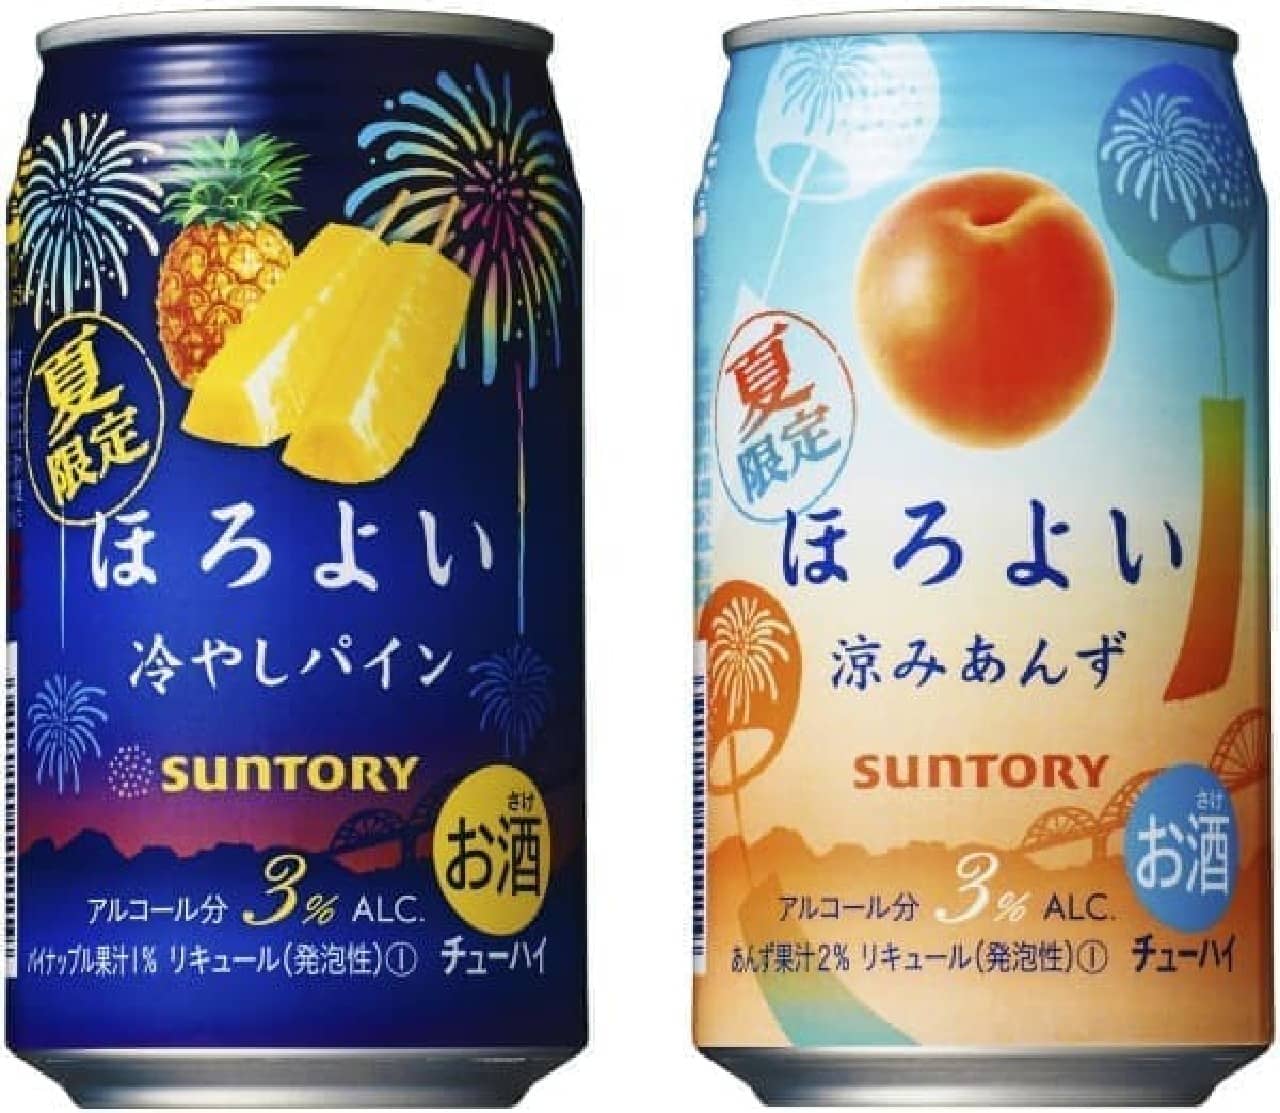 Suntory "Horoyoi Chilled Pine" and "Horoyoi Cool Apricot"